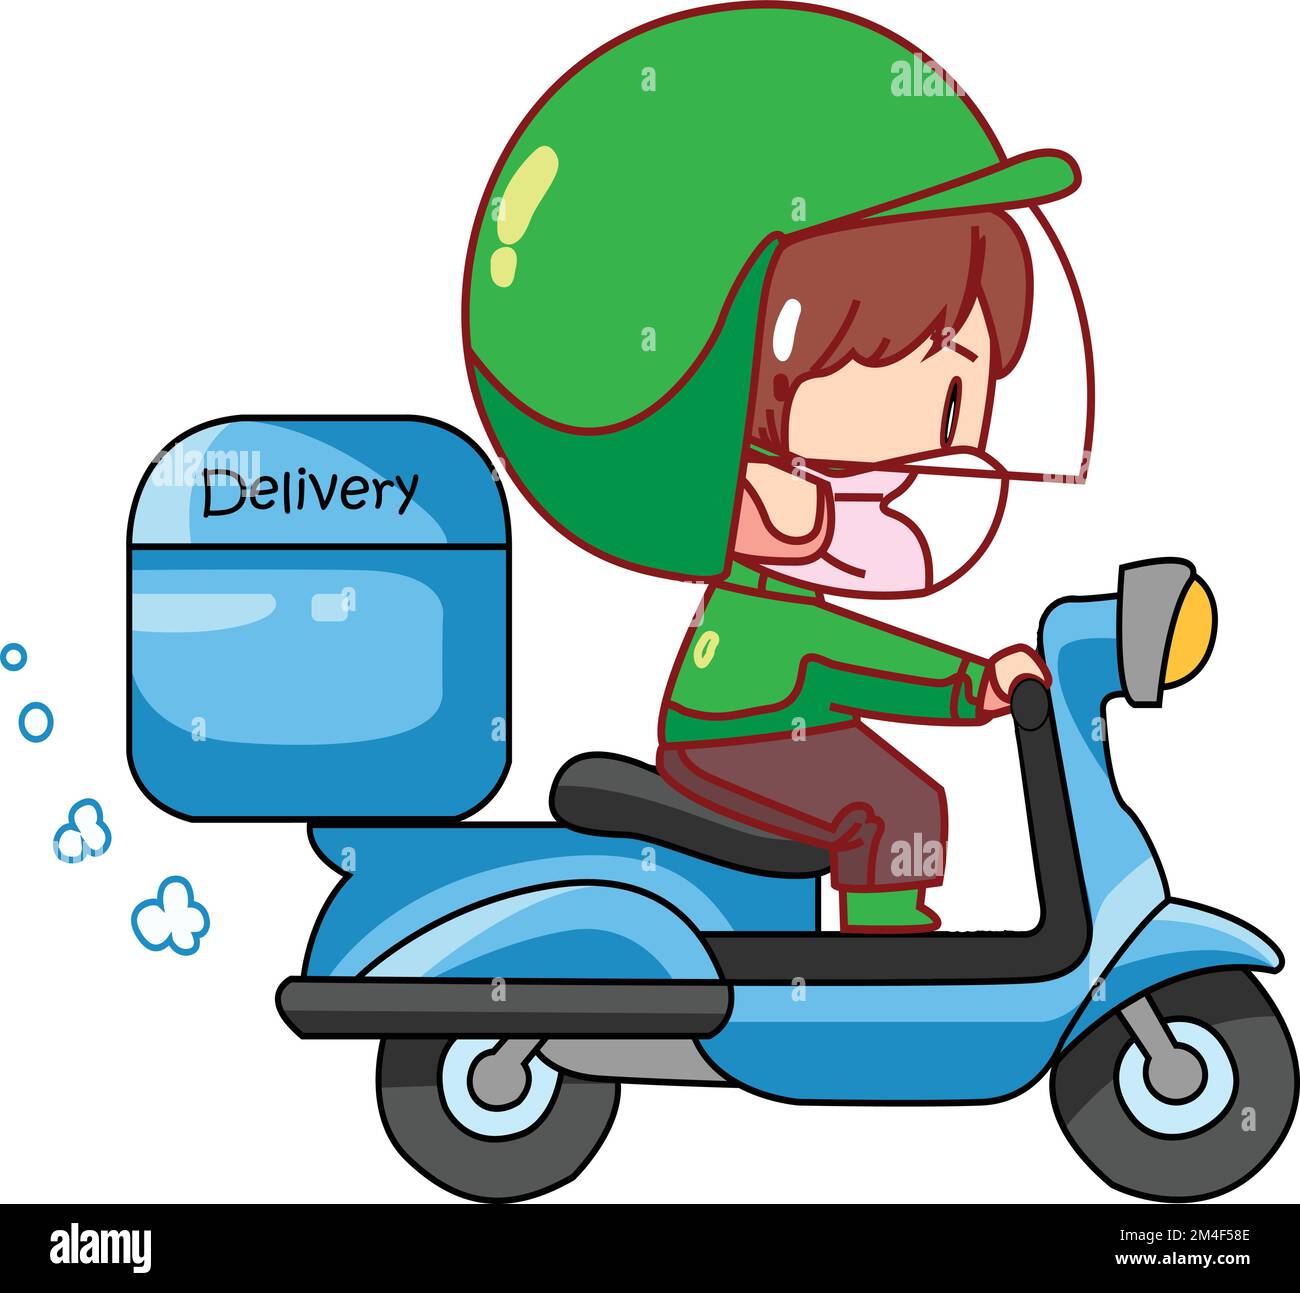 icon for delivery order Stock Vector